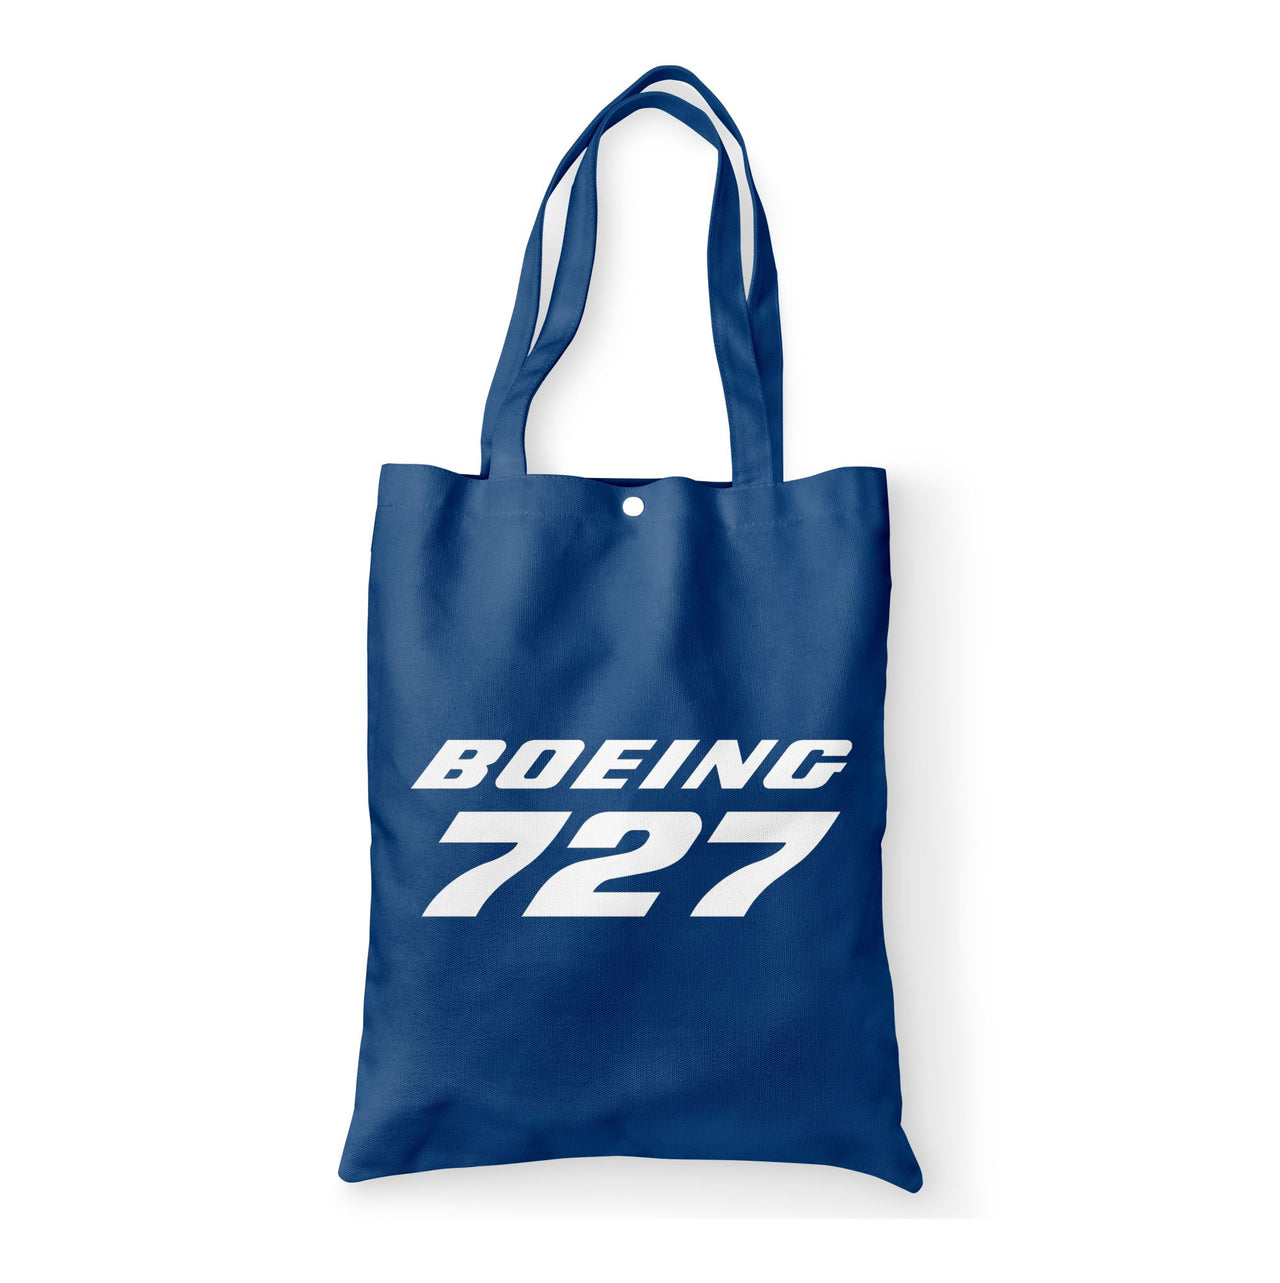 Boeing 727 & Text Designed Tote Bags